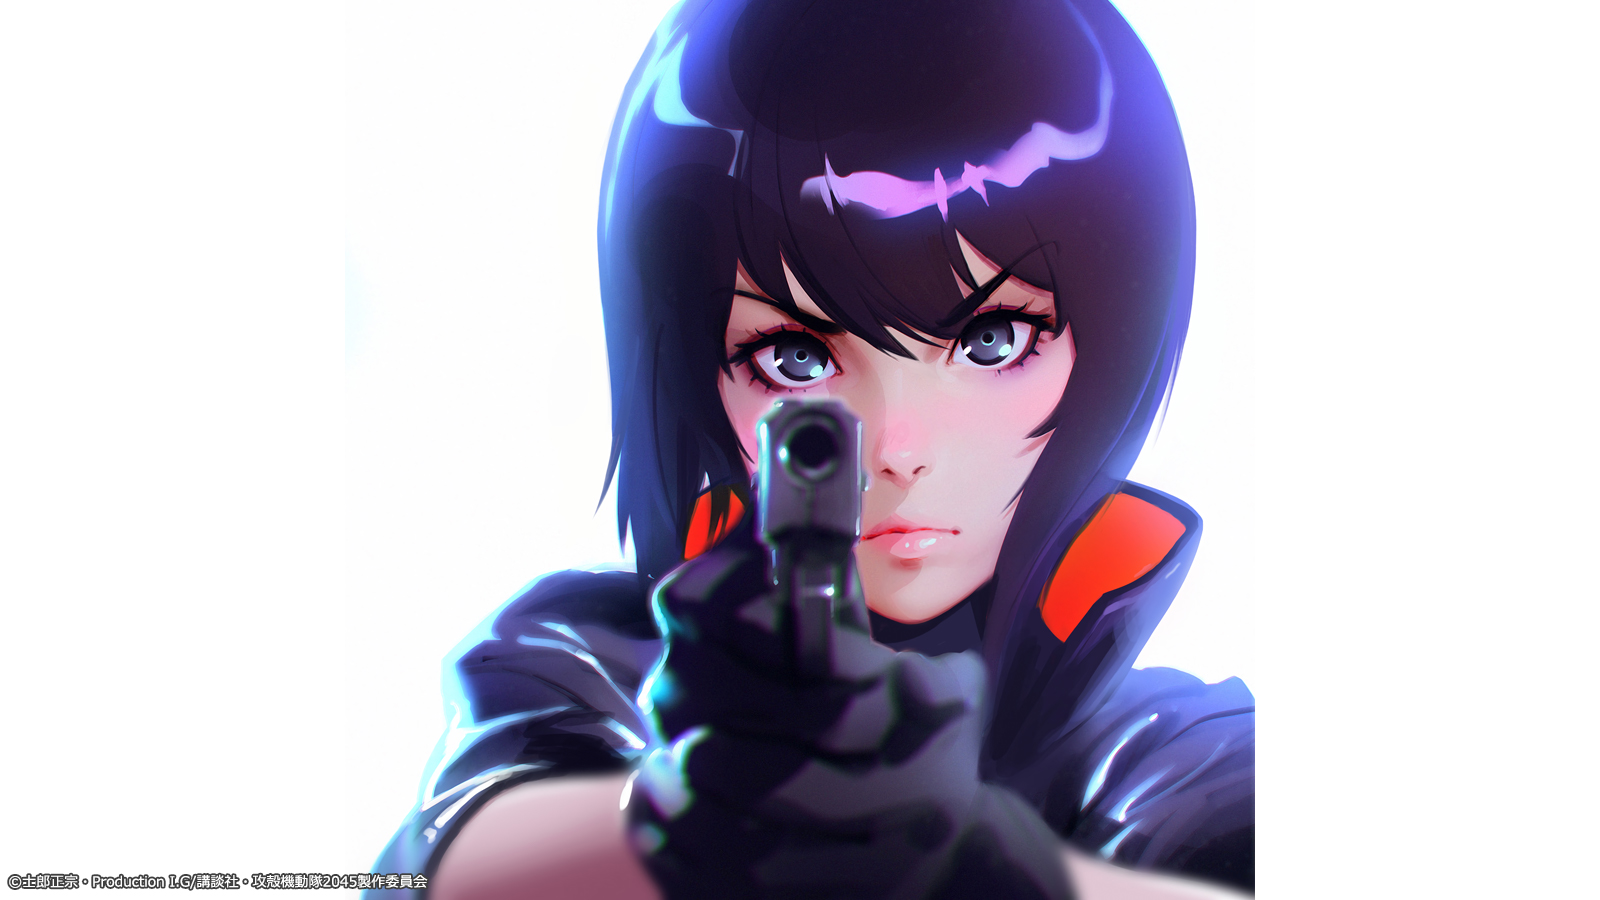 GHOST IN THE SHELL: SAC_2045